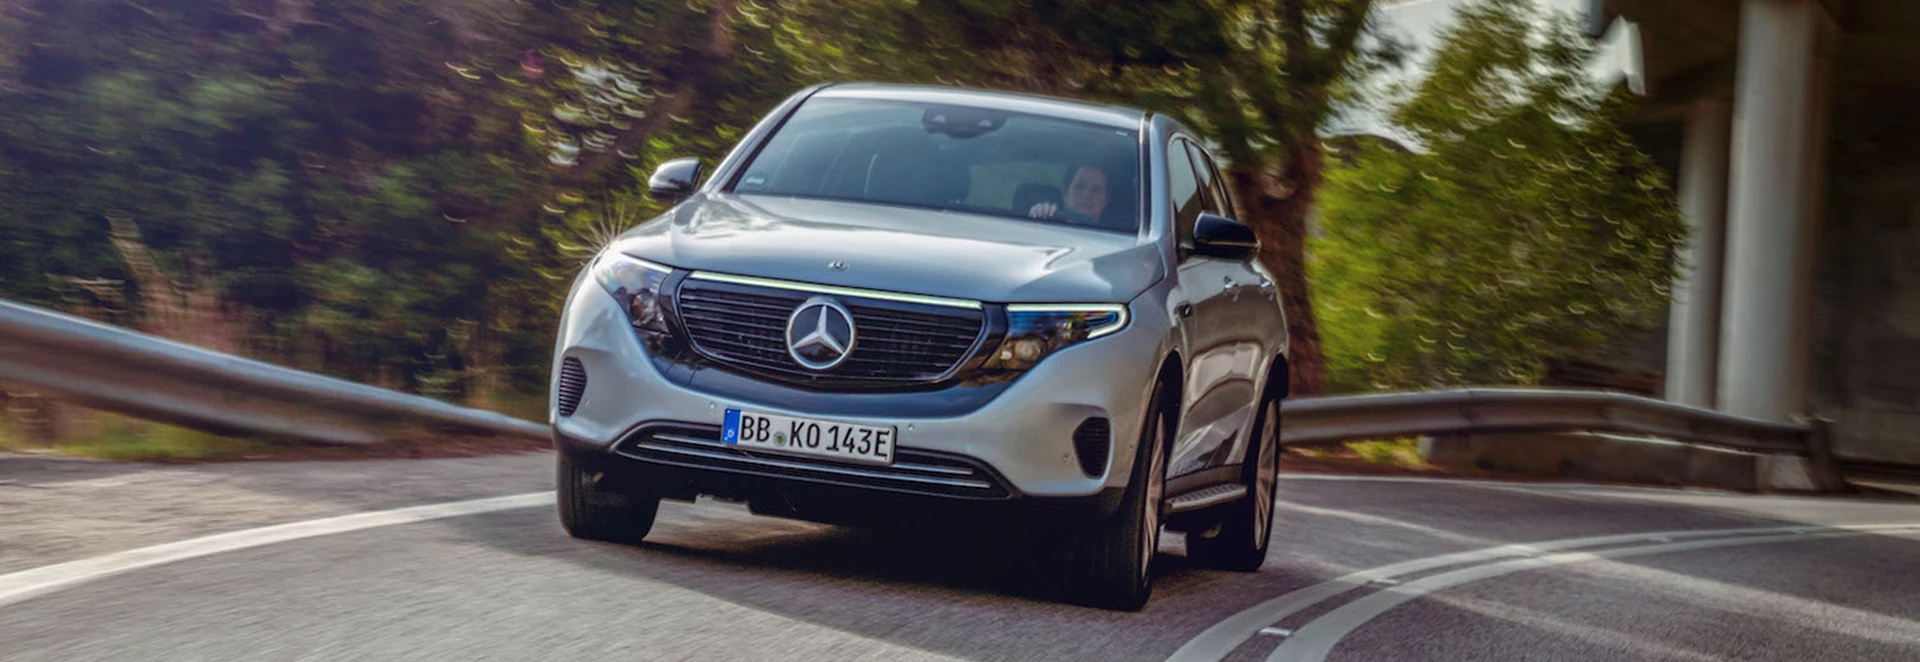 Mercedes-Benz EQC Edition 1886 revealed 